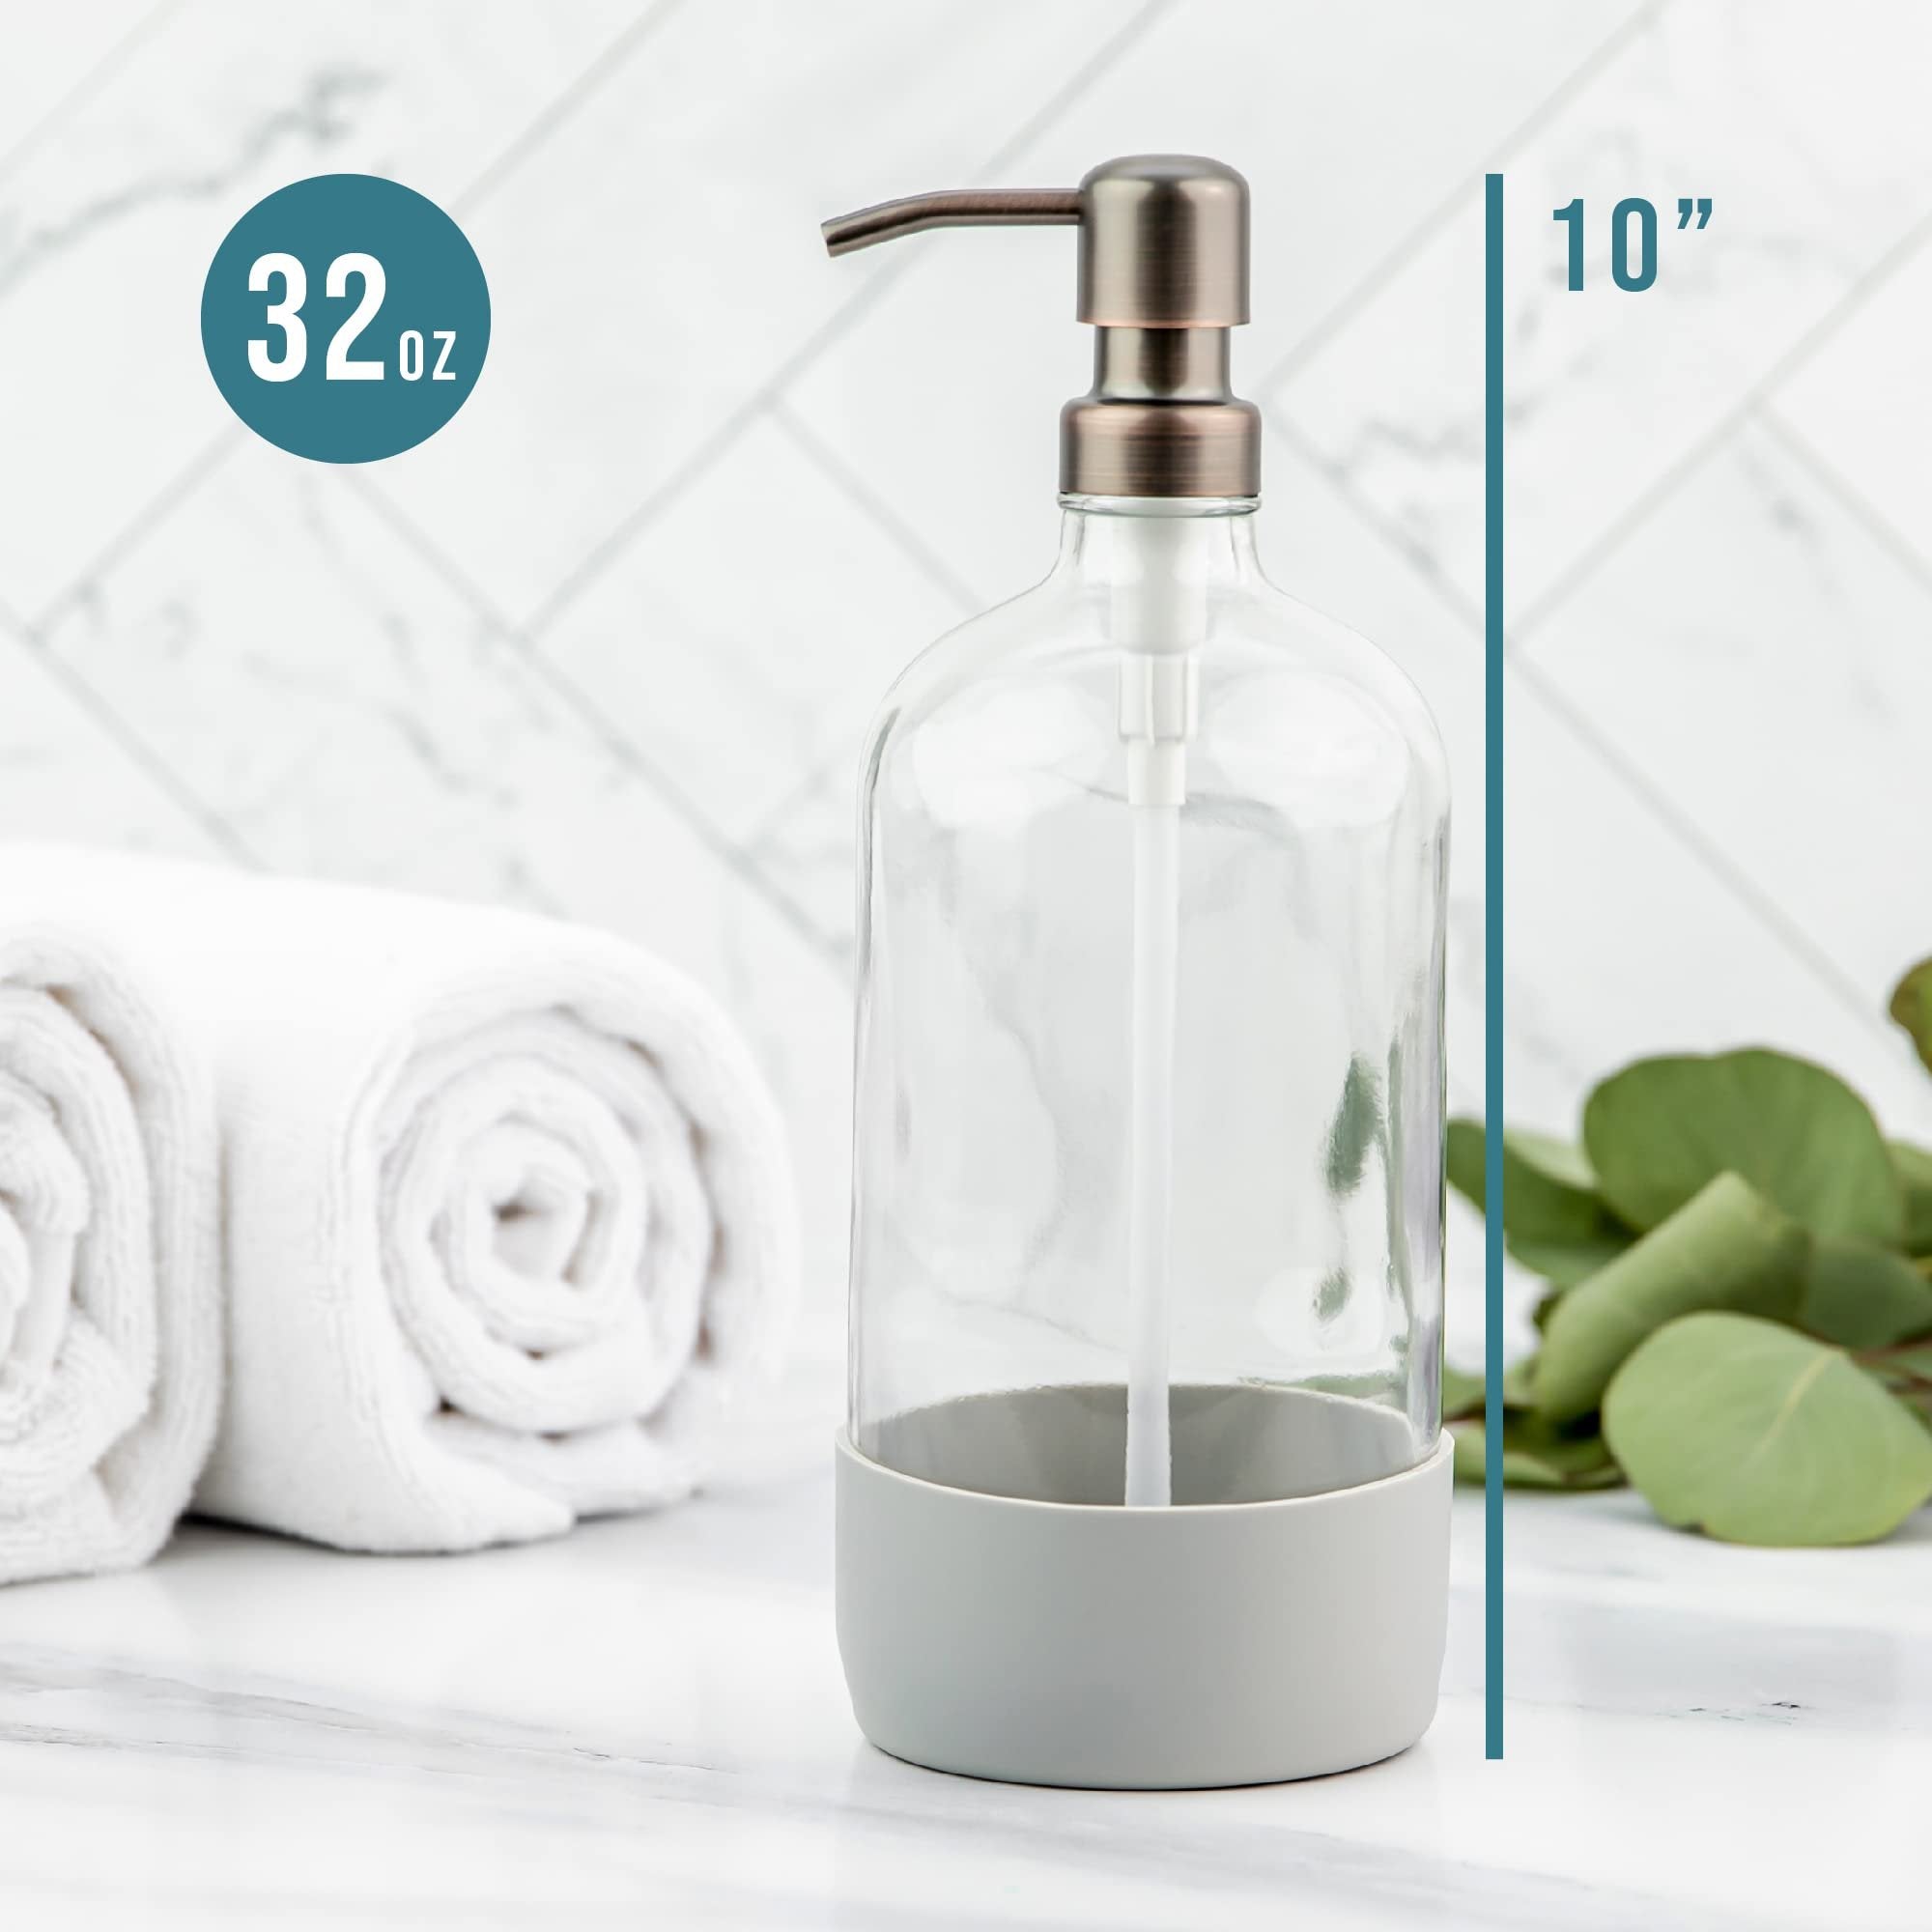 32 oz Glass Pump Bottle Rustproof Stainless Steel Pump, Funnel, and Lids. Modern Farmhouse Vintage Jar, Large Glass Shampoo Bottles with Pump and Laundry Soap Dispenser - Copper